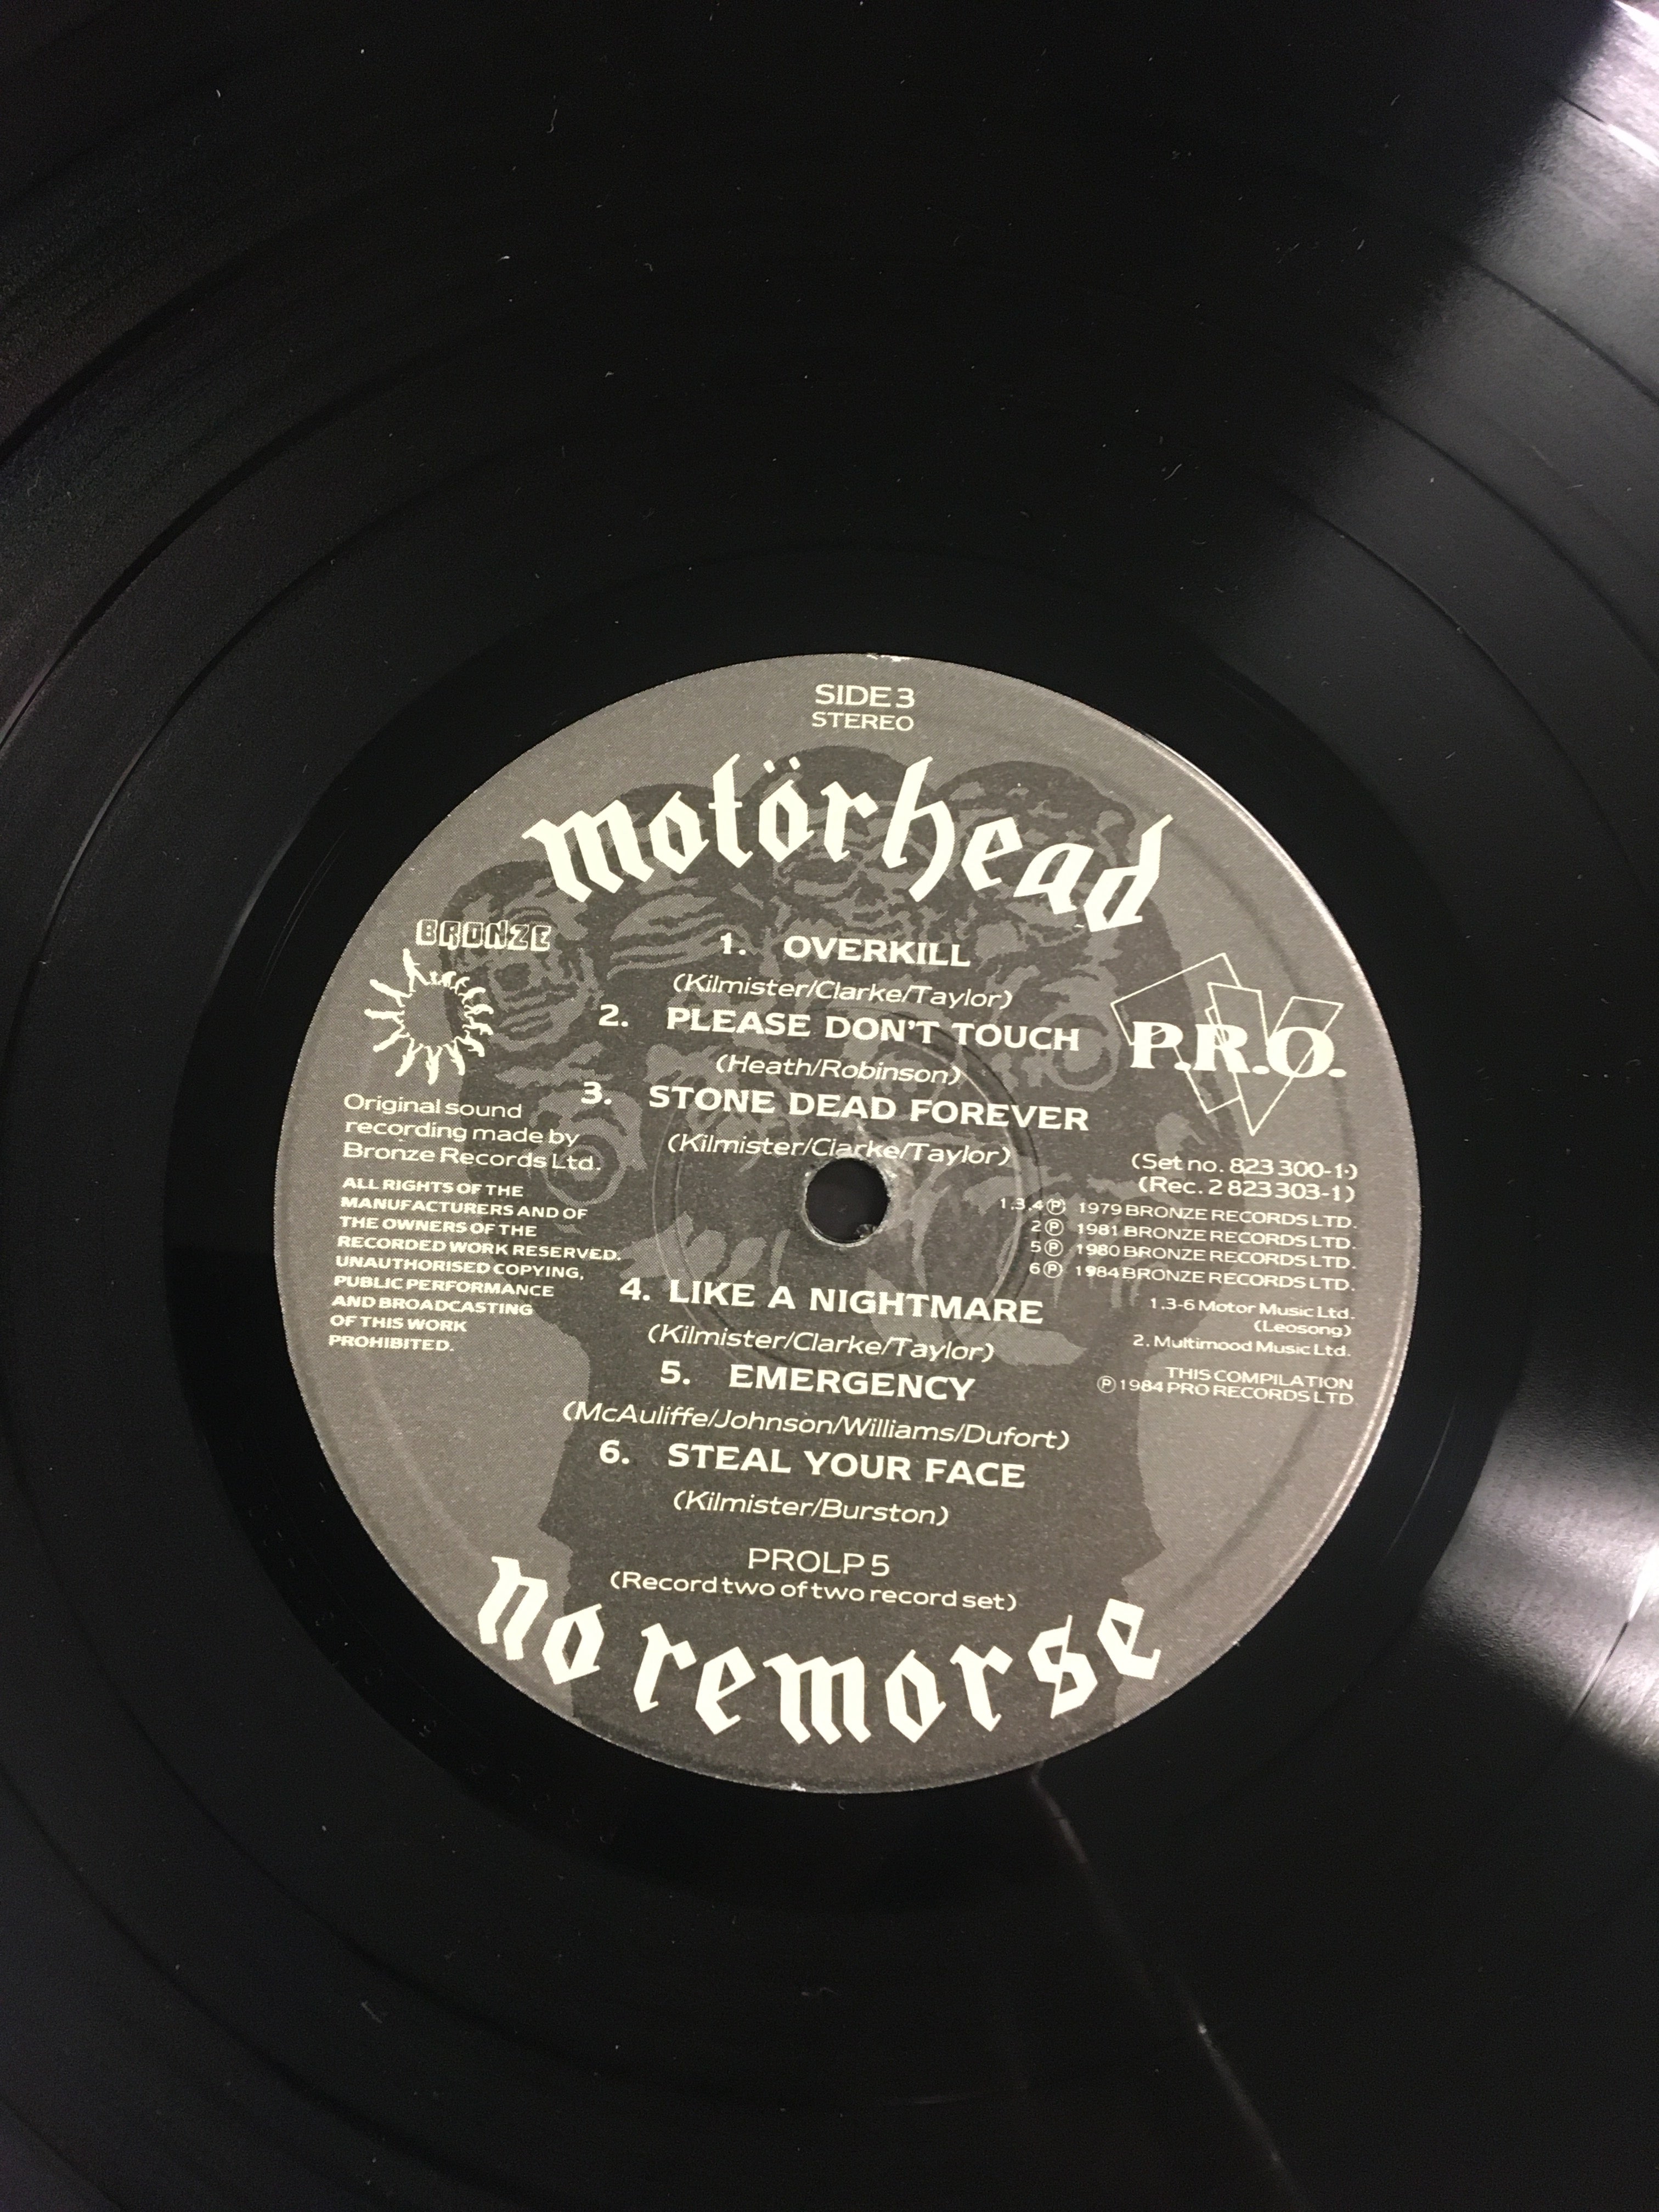 REMORSE　NO　Records　MOTORHEAD　–　and　LP　Grind　Groove